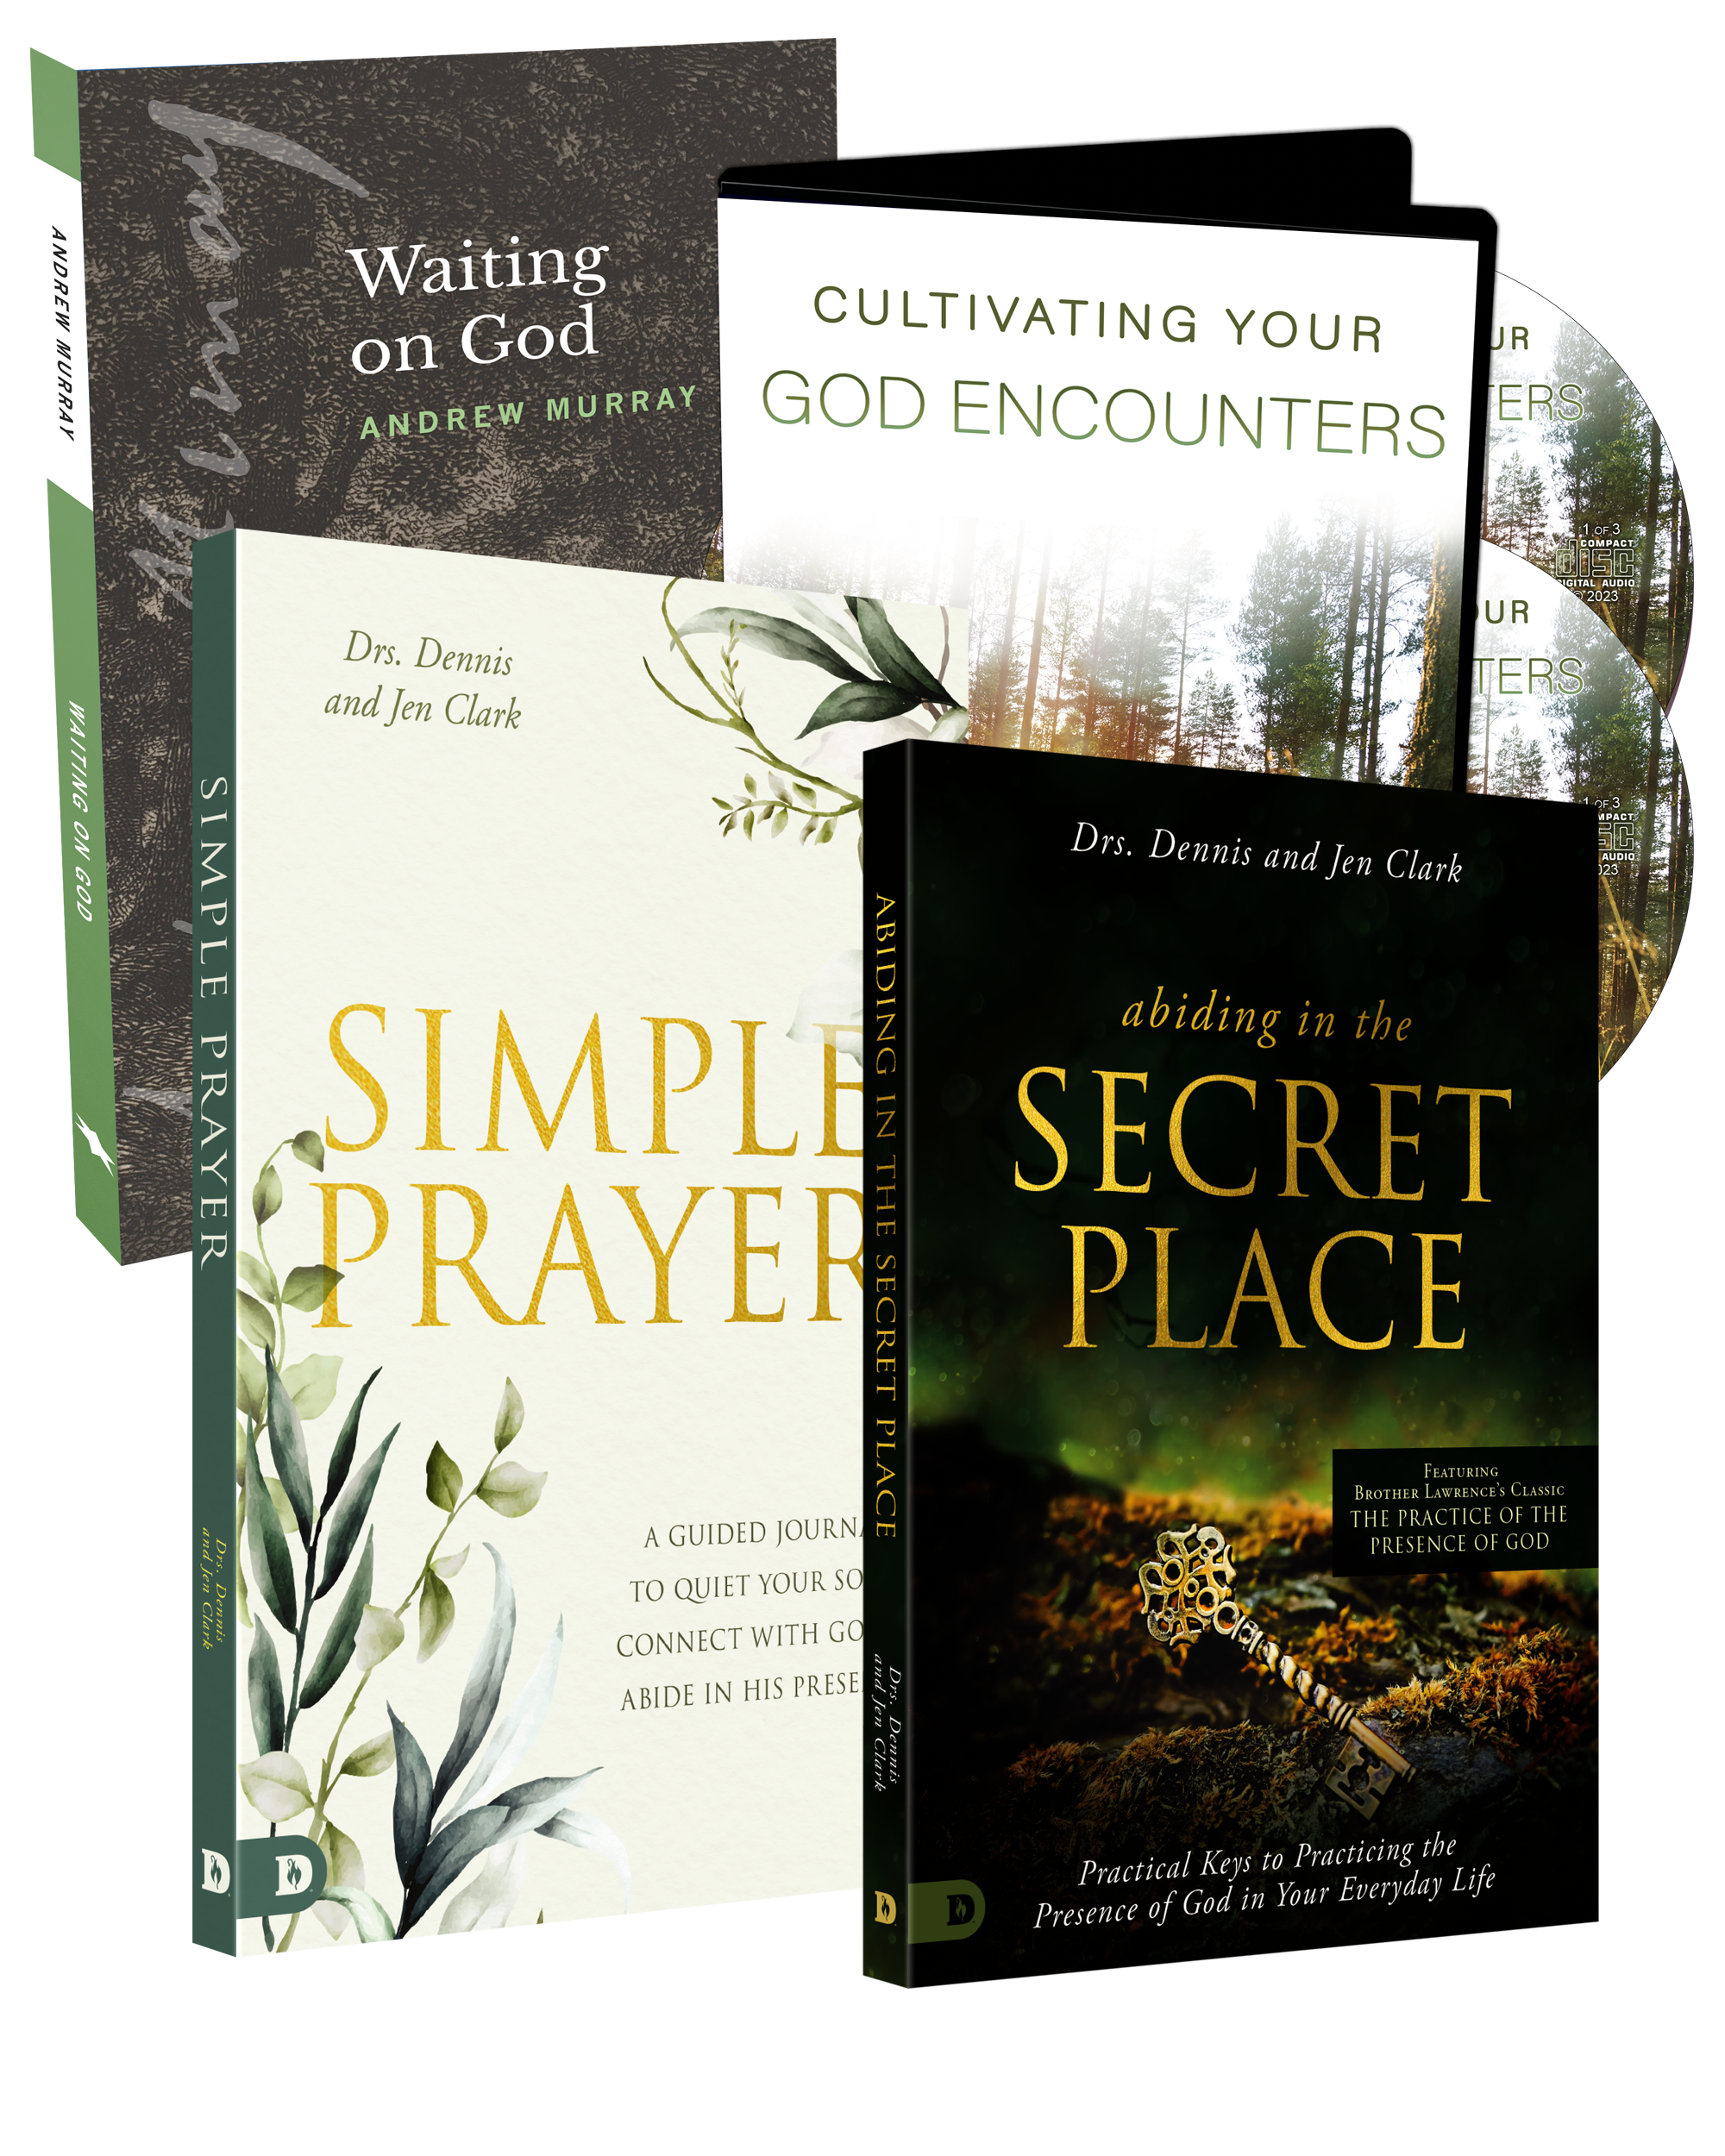 Your Sacred Encounters by Torrey Harper and Drs. Dennis and Jen Clark